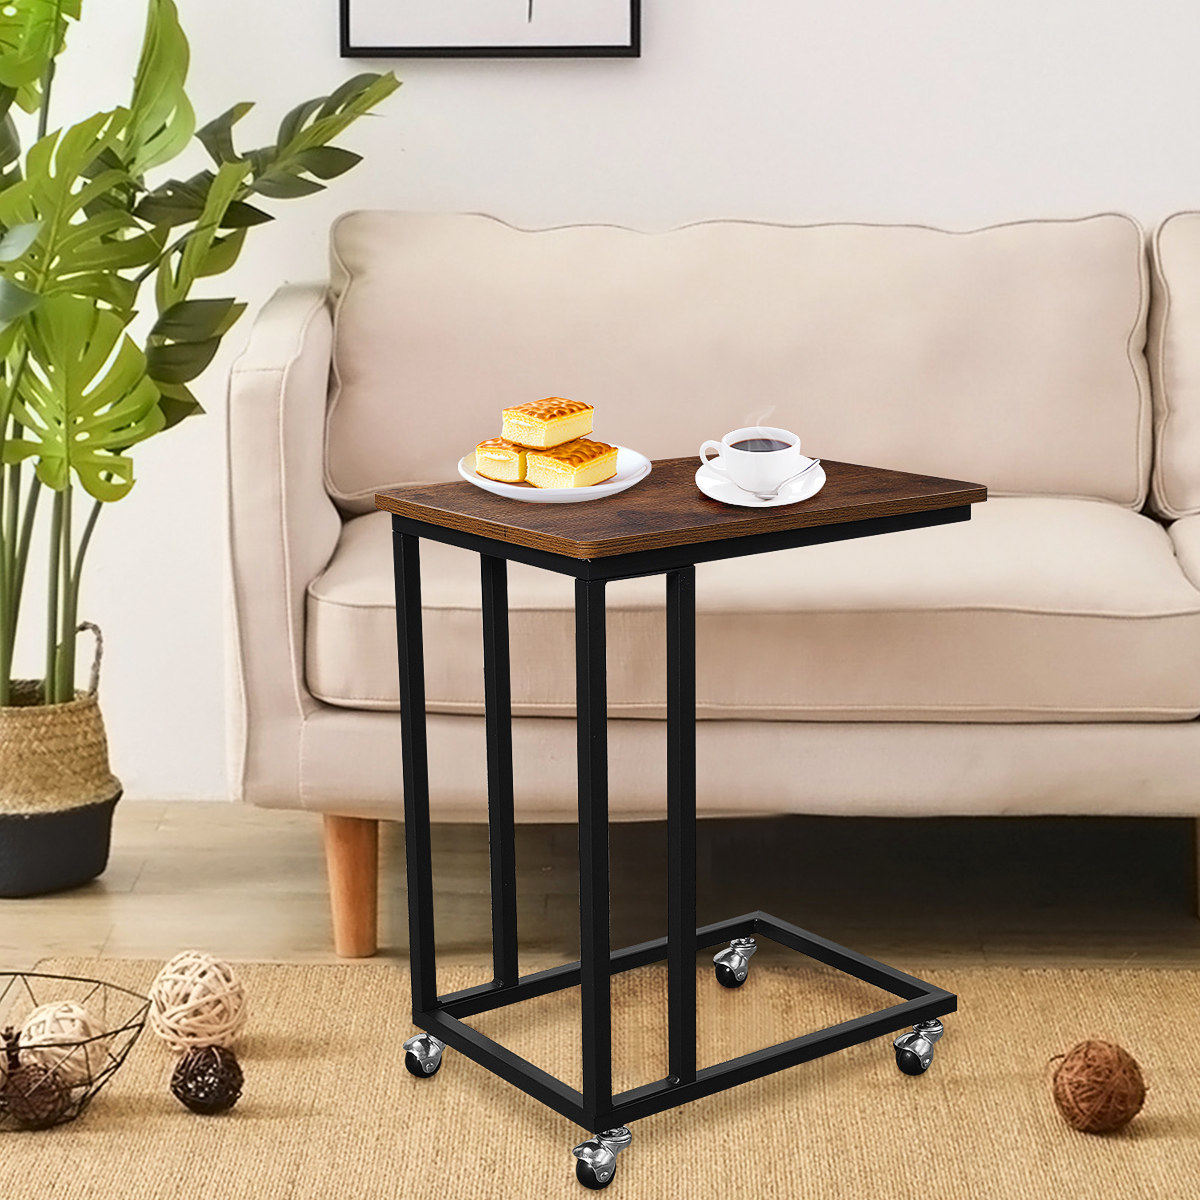 An image of a C-shaped side sofa table with four wheels